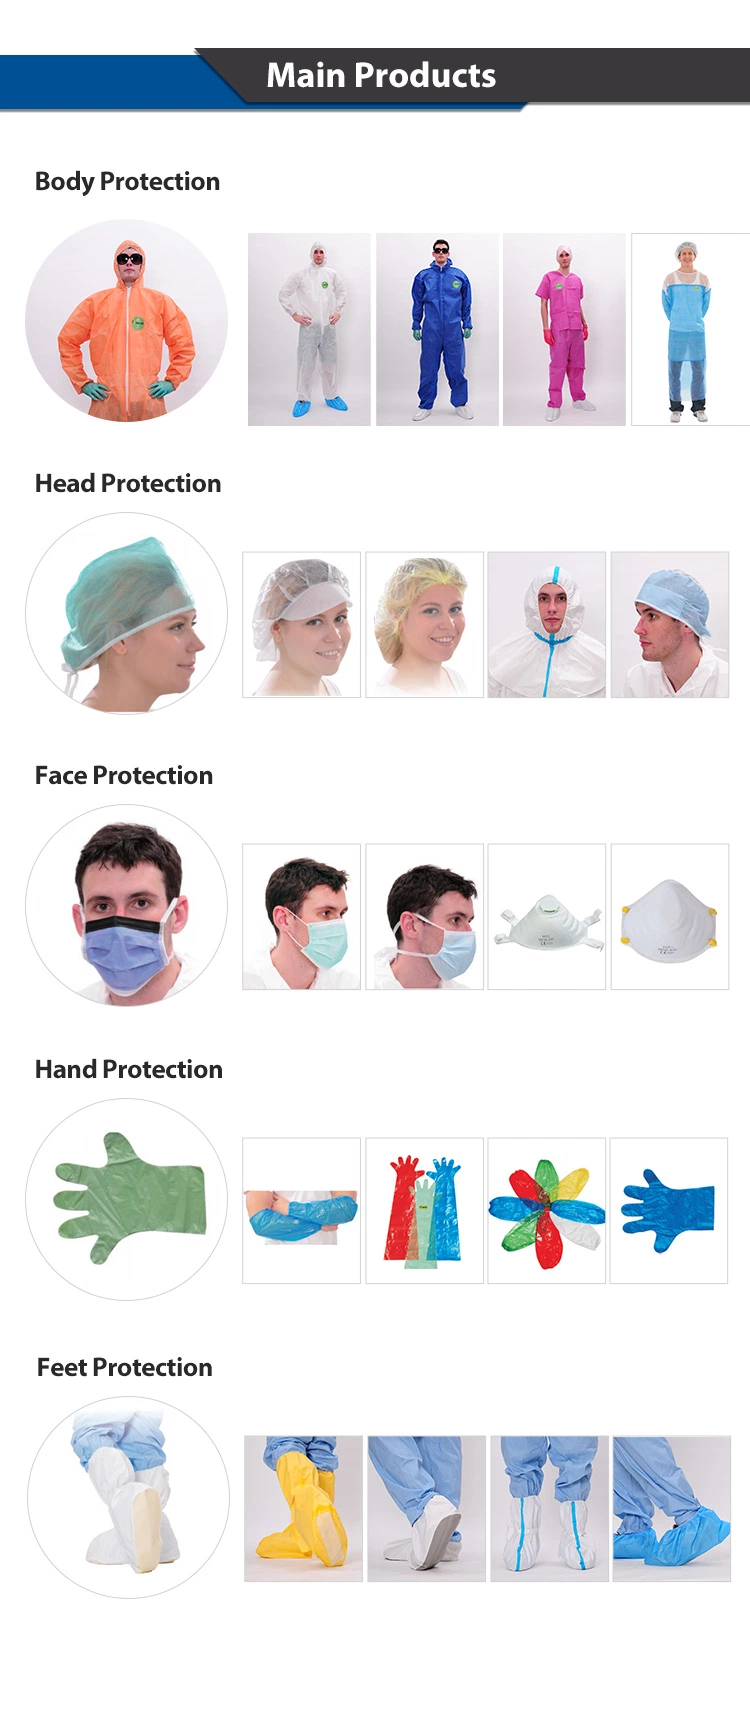 PP Stocked Medical Face Mask Anti Dust 17.5X9.5cm for Face Cover Protection Raygard 11031 White